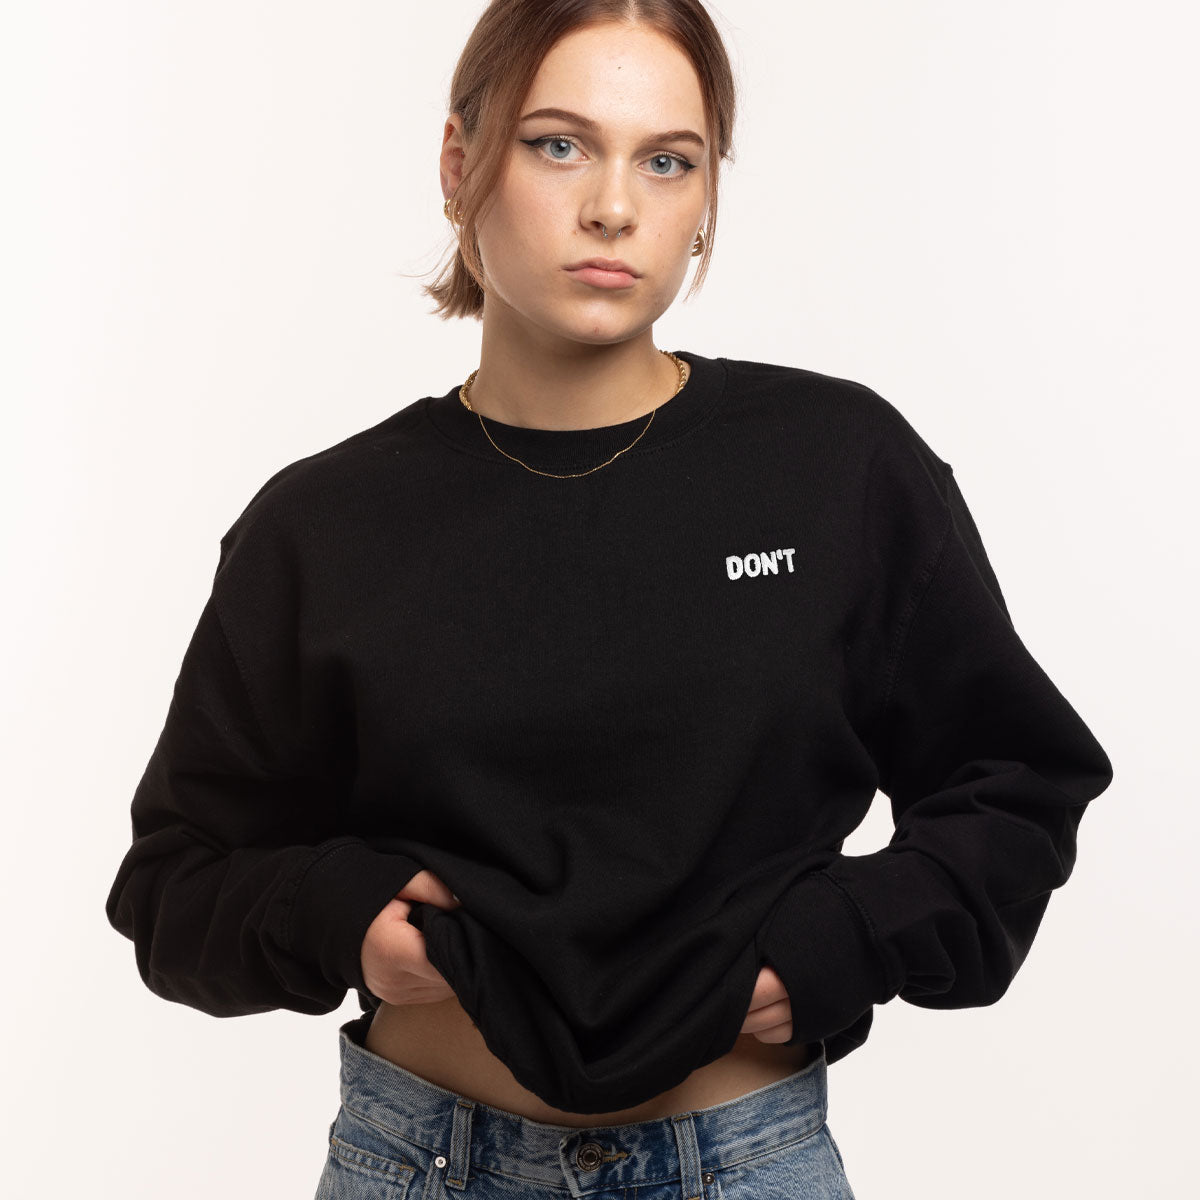 Don't Embroidery Detail Sweatshirt